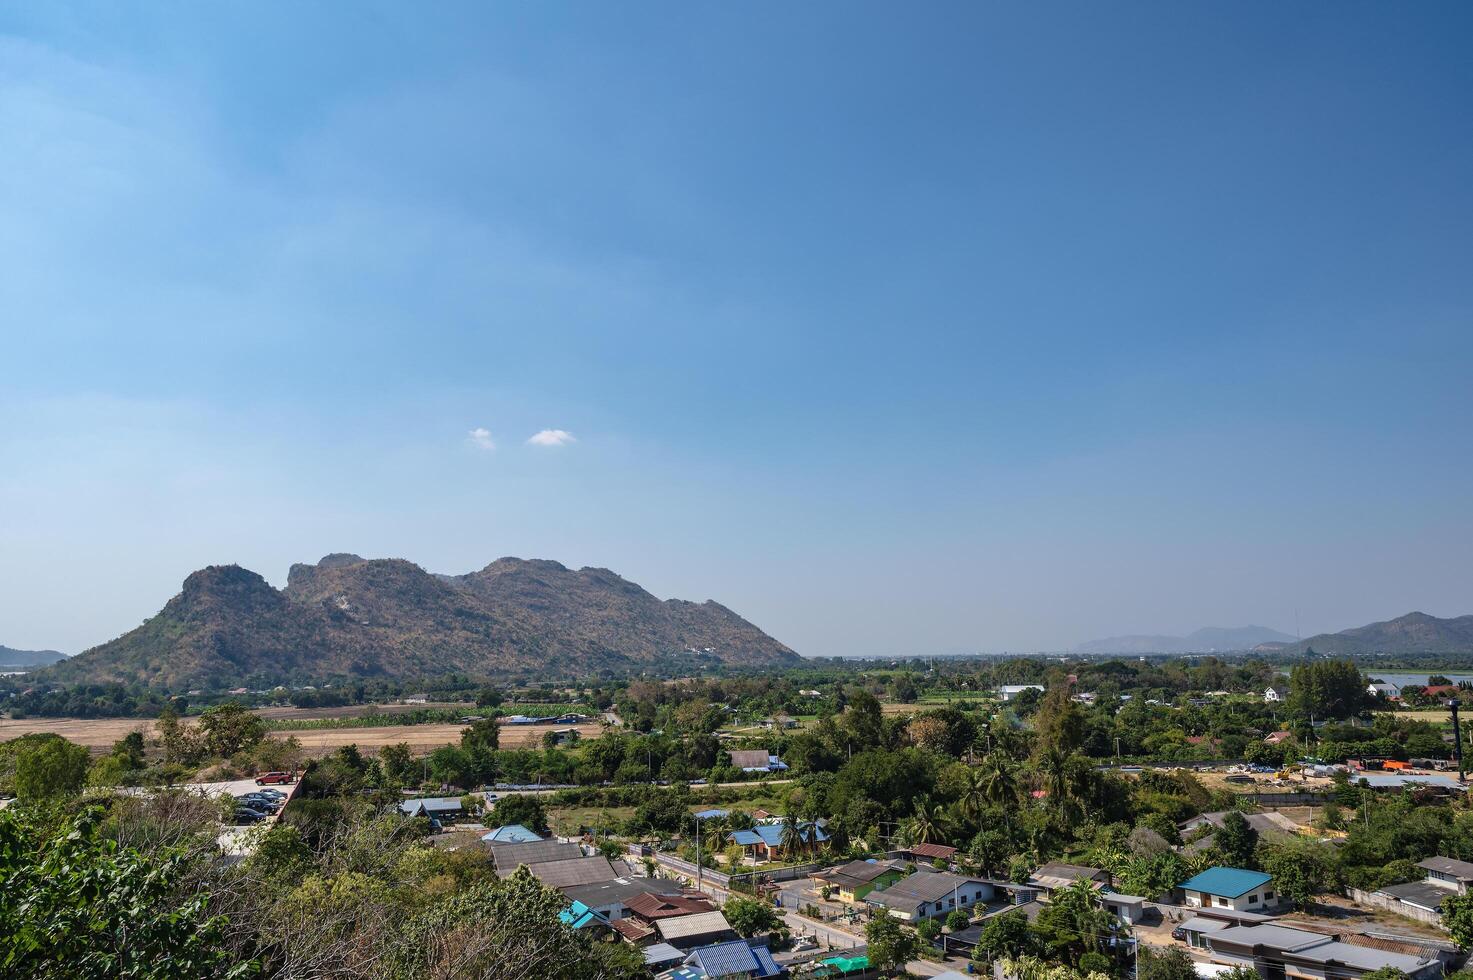 Landscape view from Wat Tham Suea Tiger Cave Temple kanchanaburi thailand.An 18-meter-tall Buddha built in 1973 is the focus of this well-known temple on a hilltop. photo